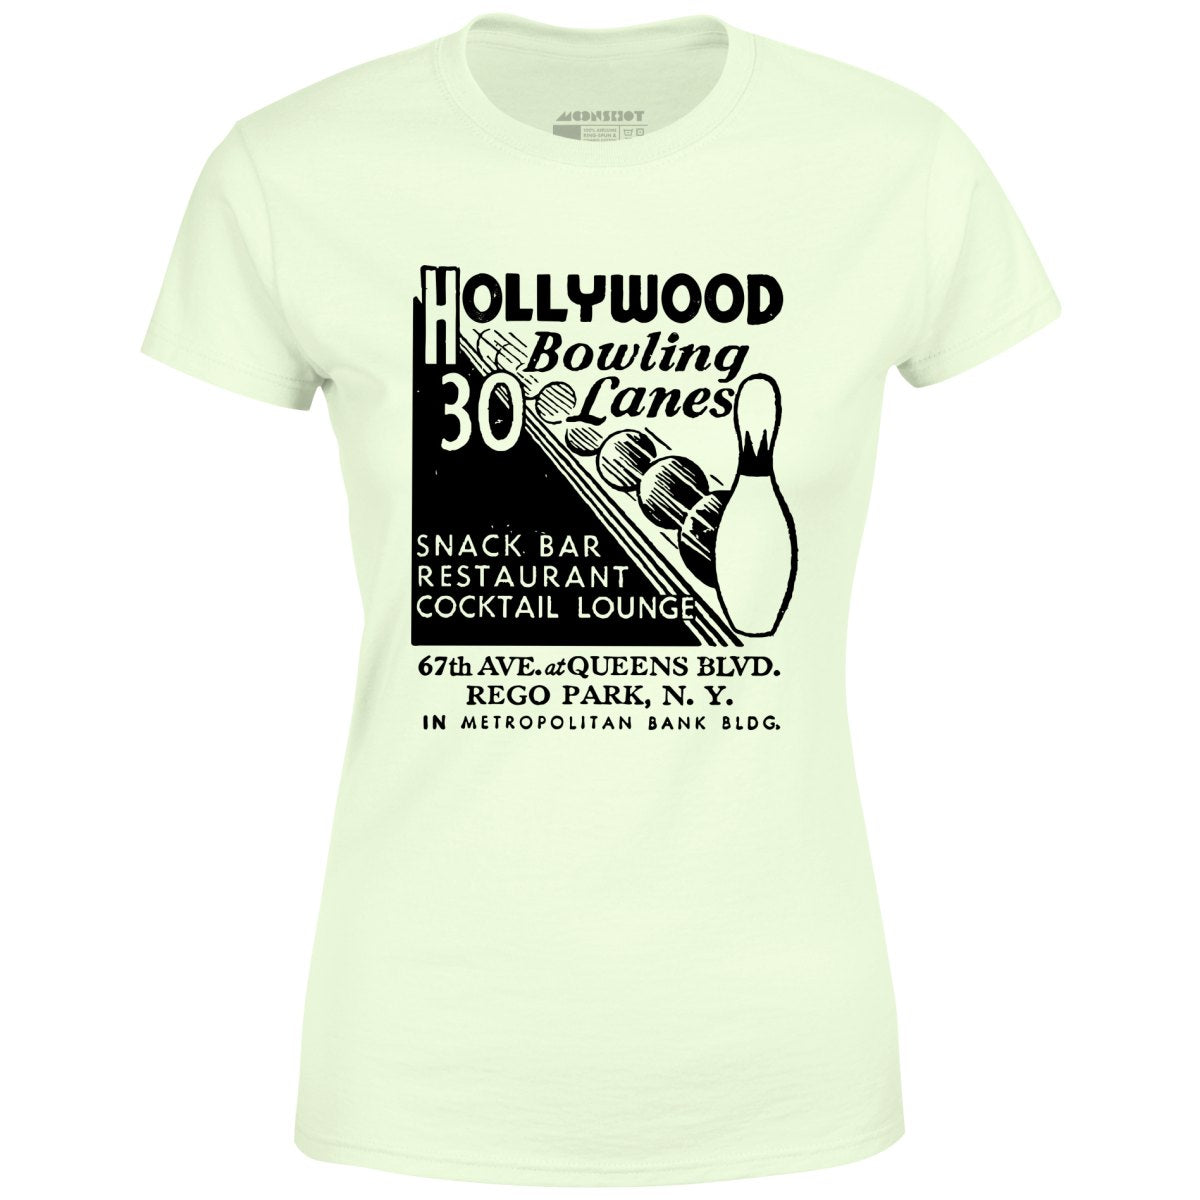 Hollywood Bowling Lanes - Rego Park, NY - Vintage Bowling Alley - Women's T-Shirt